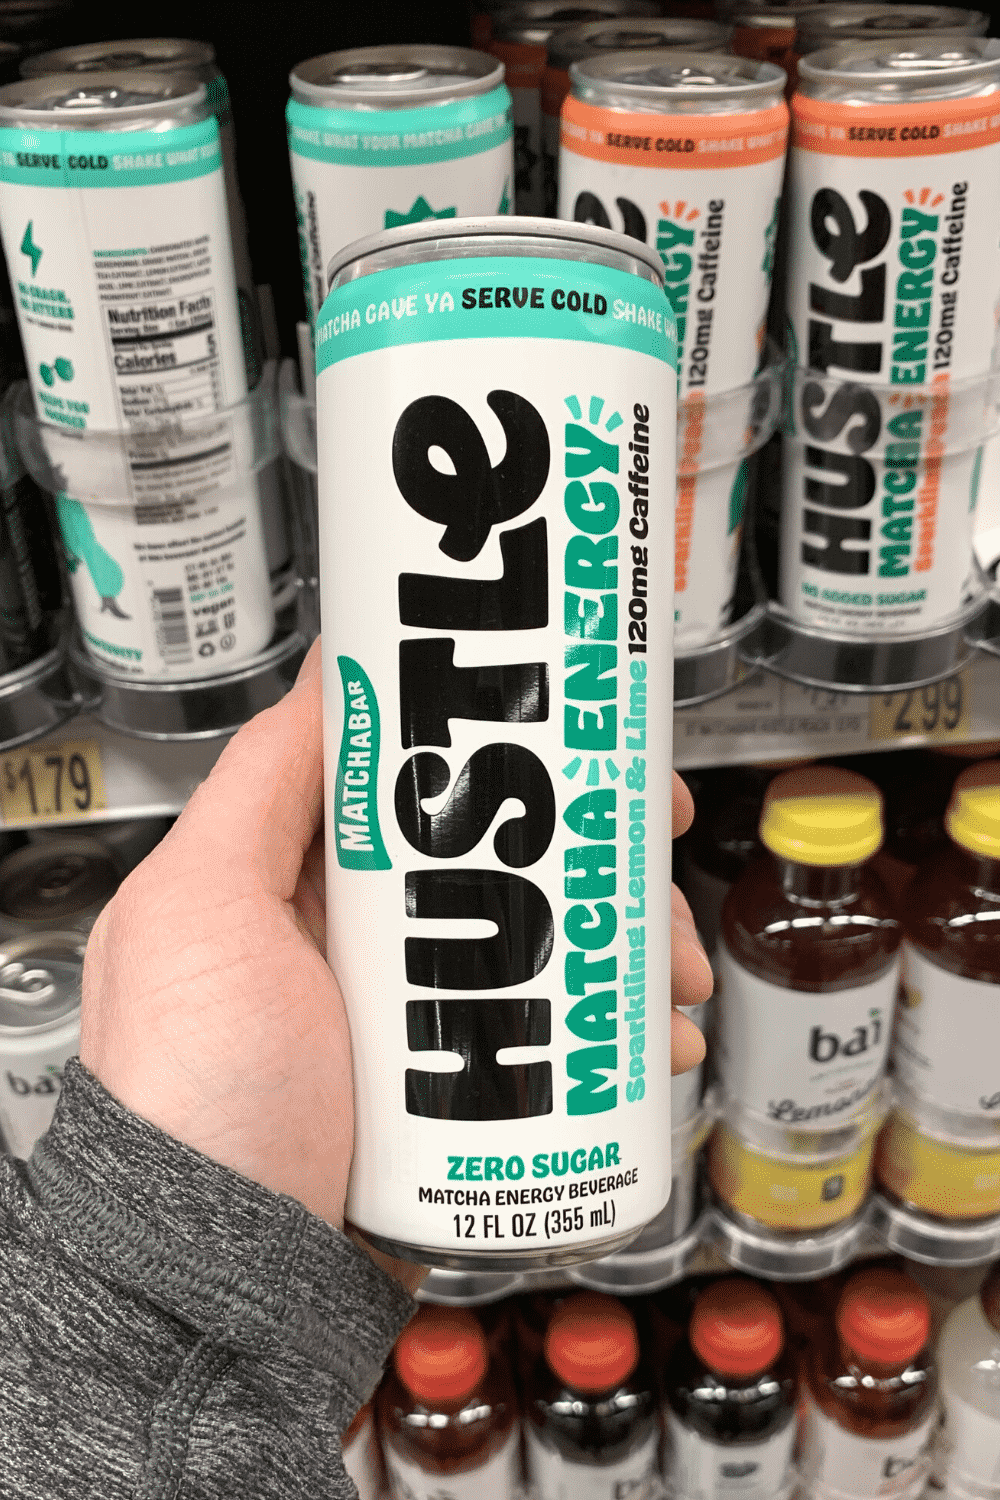 A hand holding a can of Hustle matcha energy sparkling lemon and lime flavor